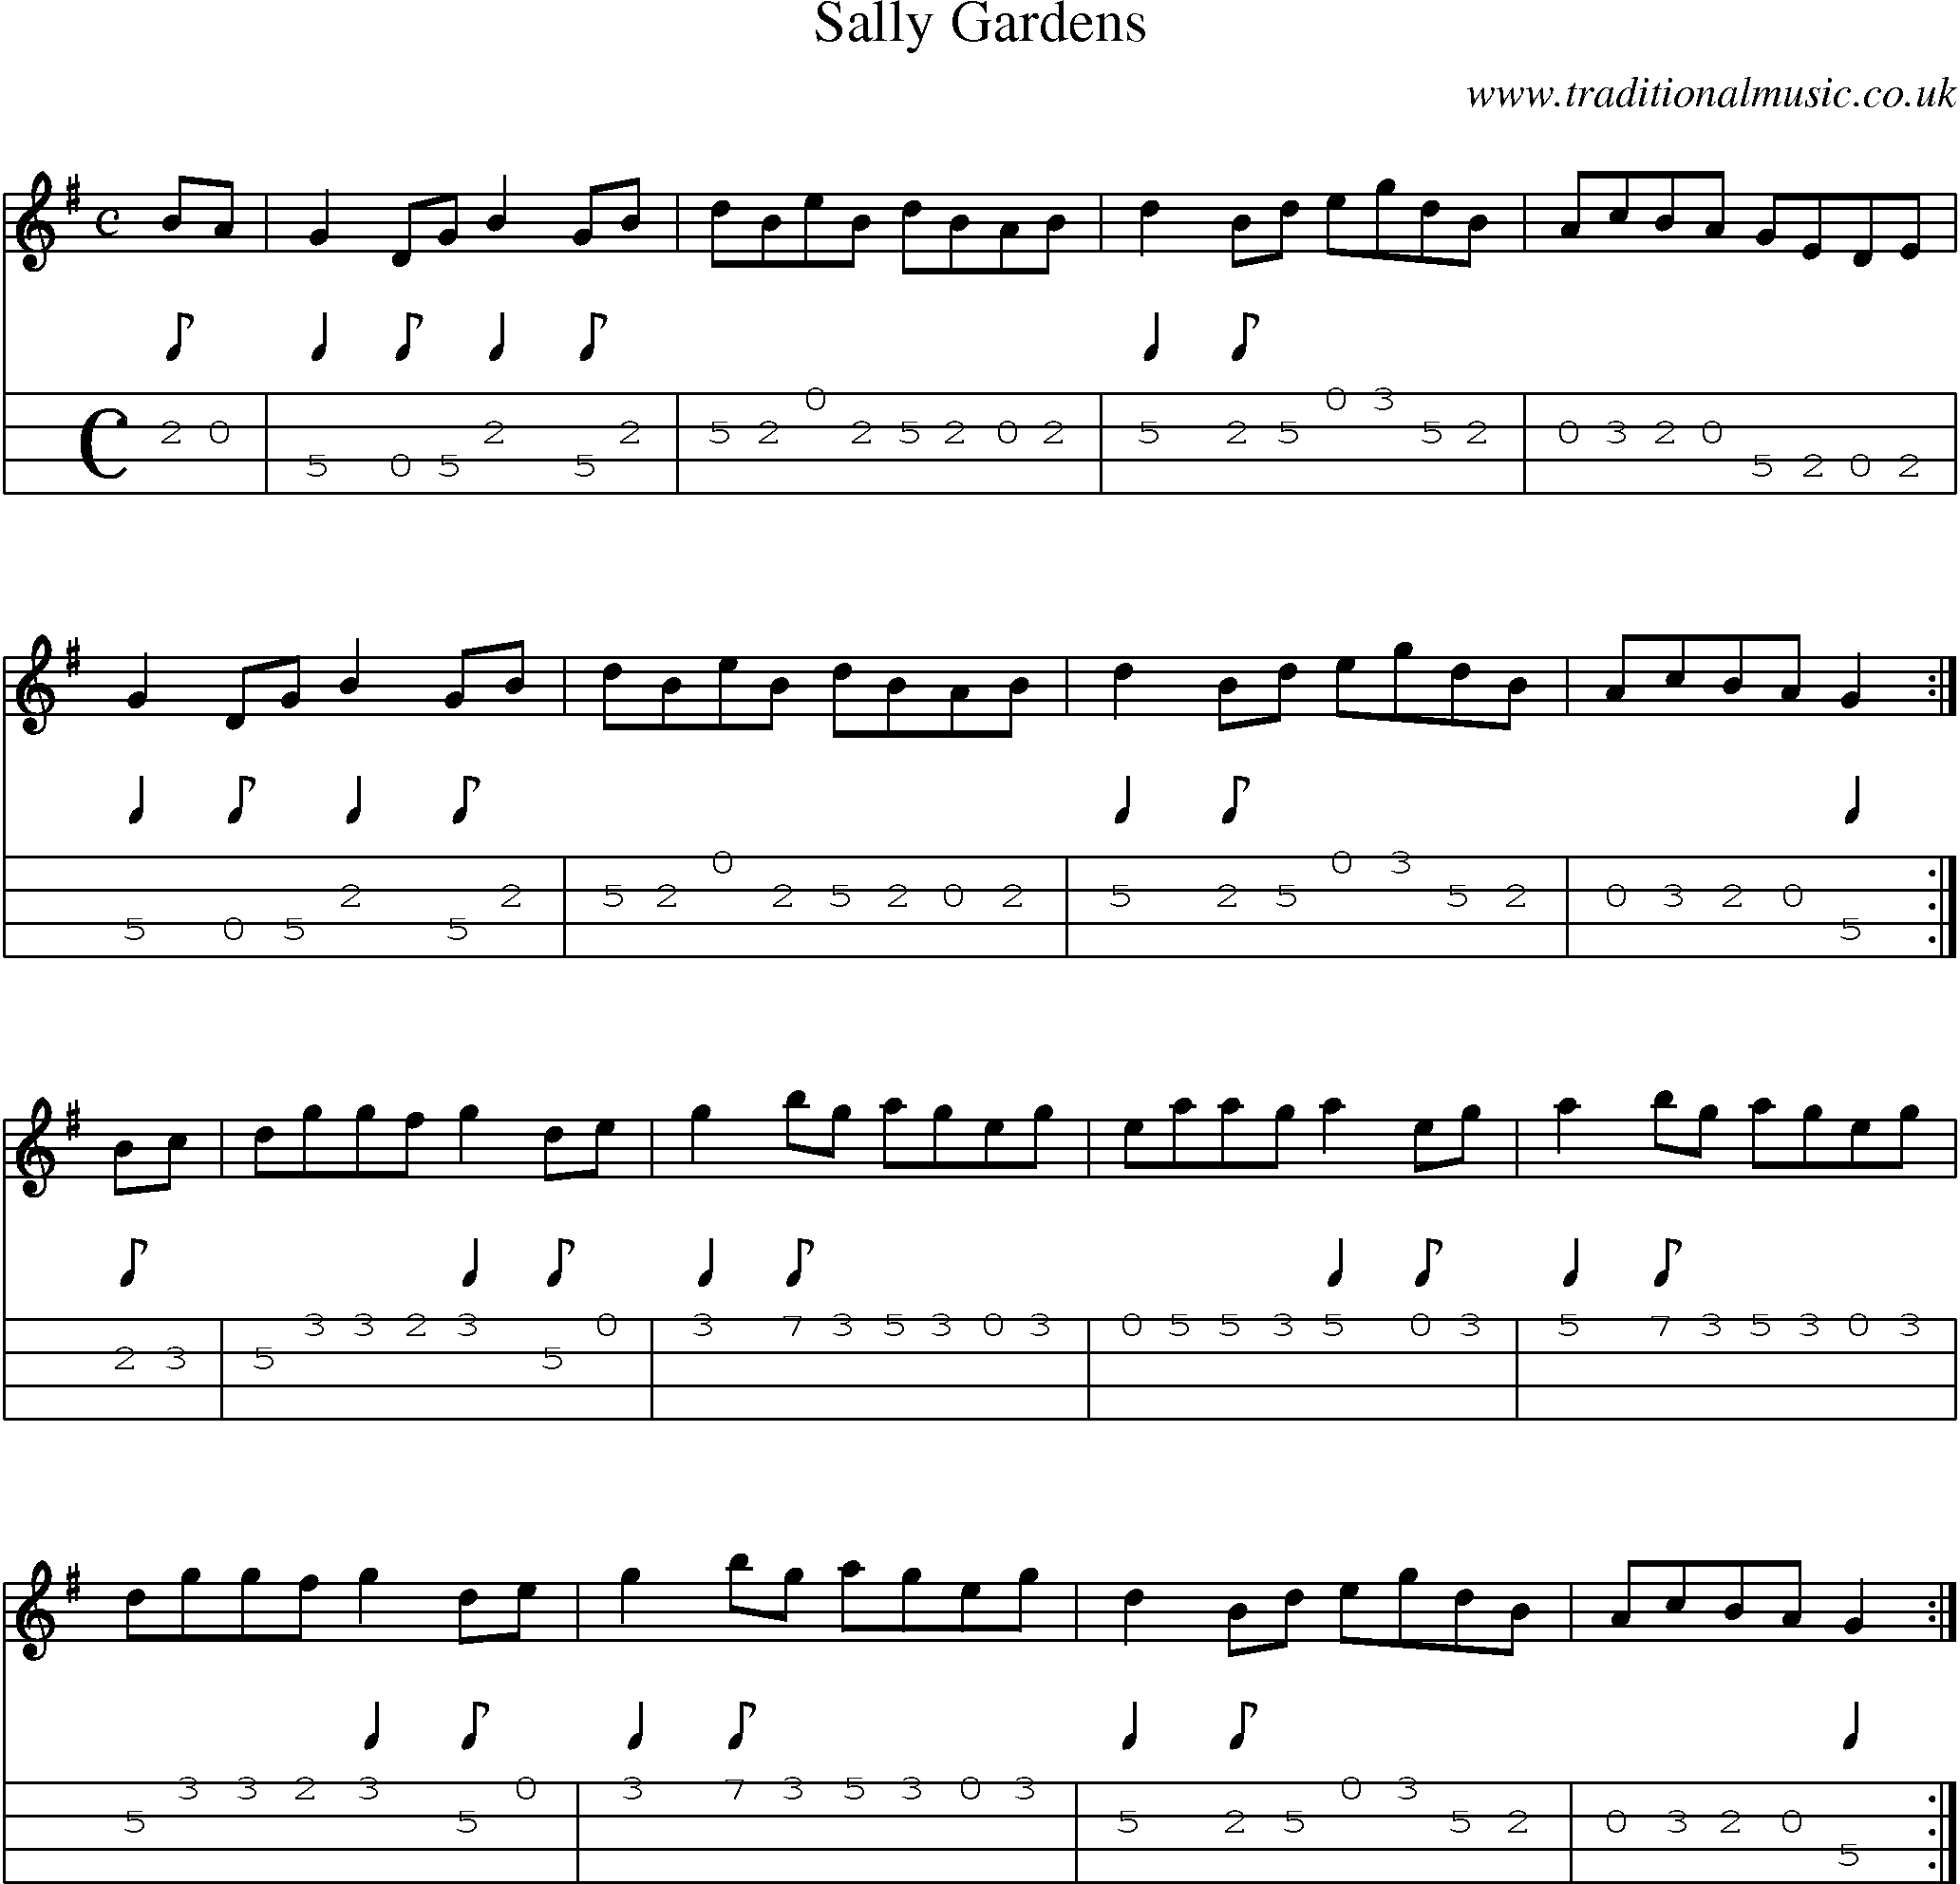 Music Score and Mandolin Tabs for Sally Gardens